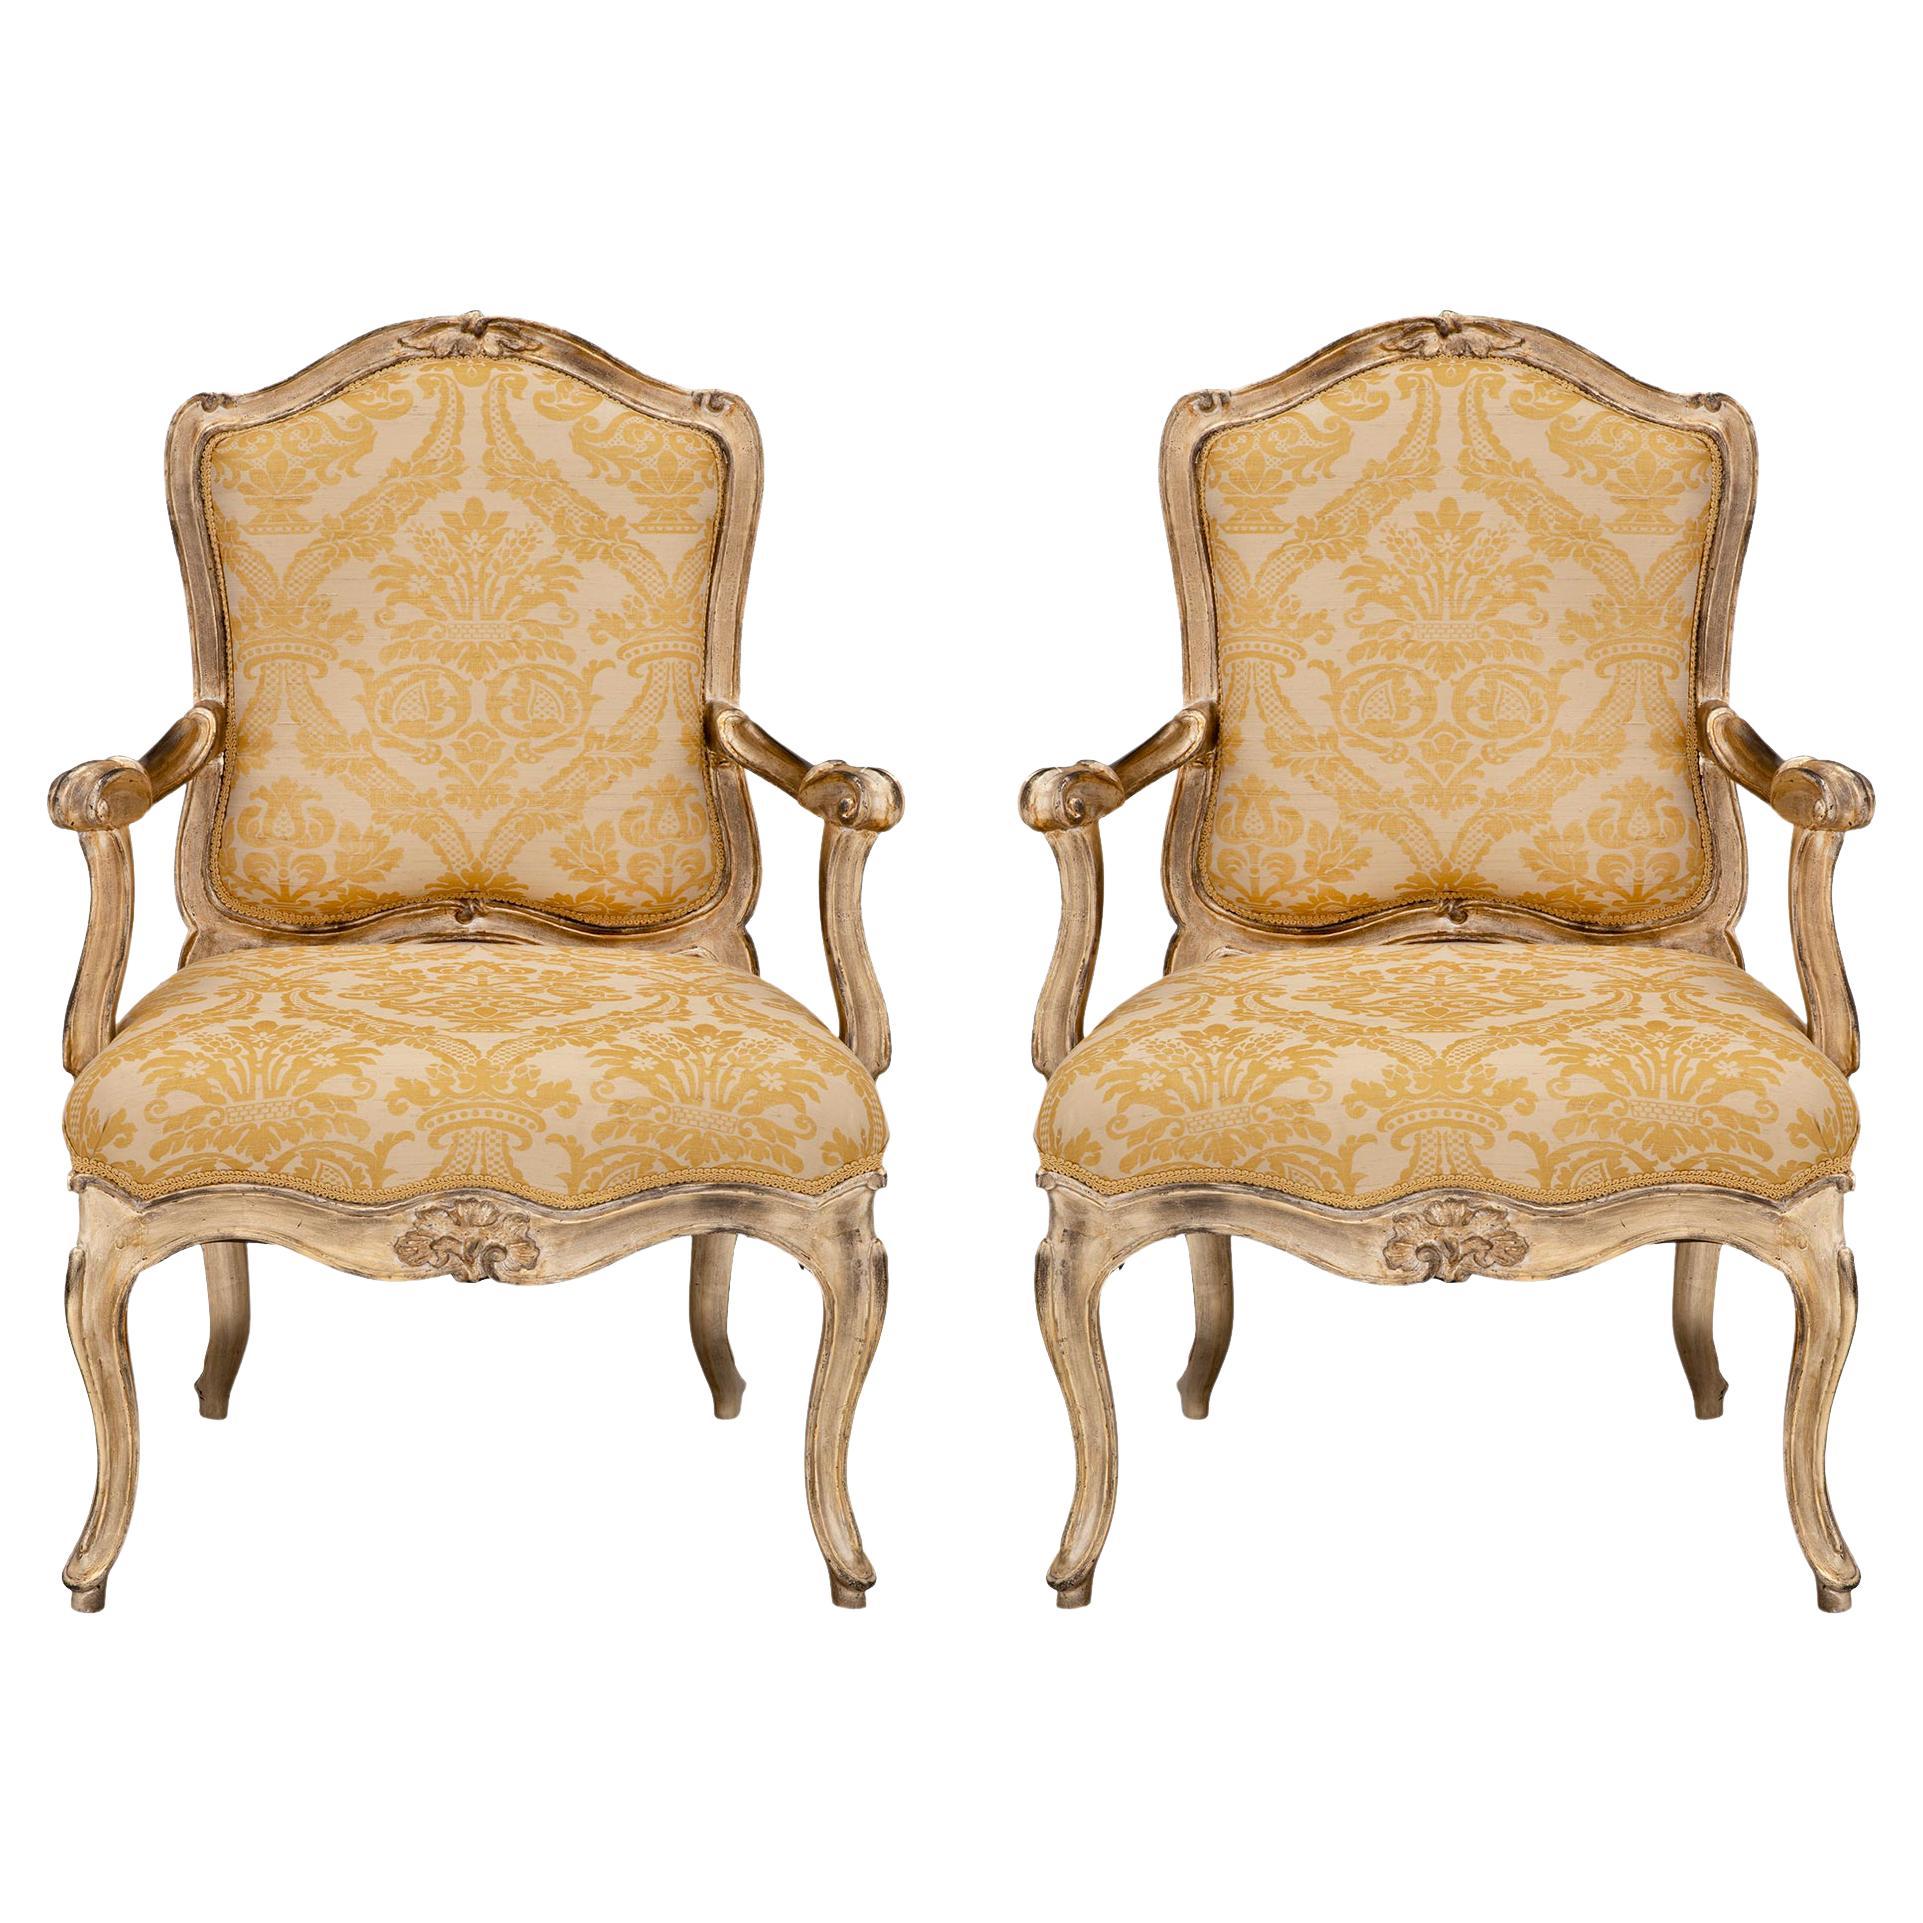 Pair of Italian 18th Century Louis XV Style Silvered Leaf Venetian Armchairs For Sale